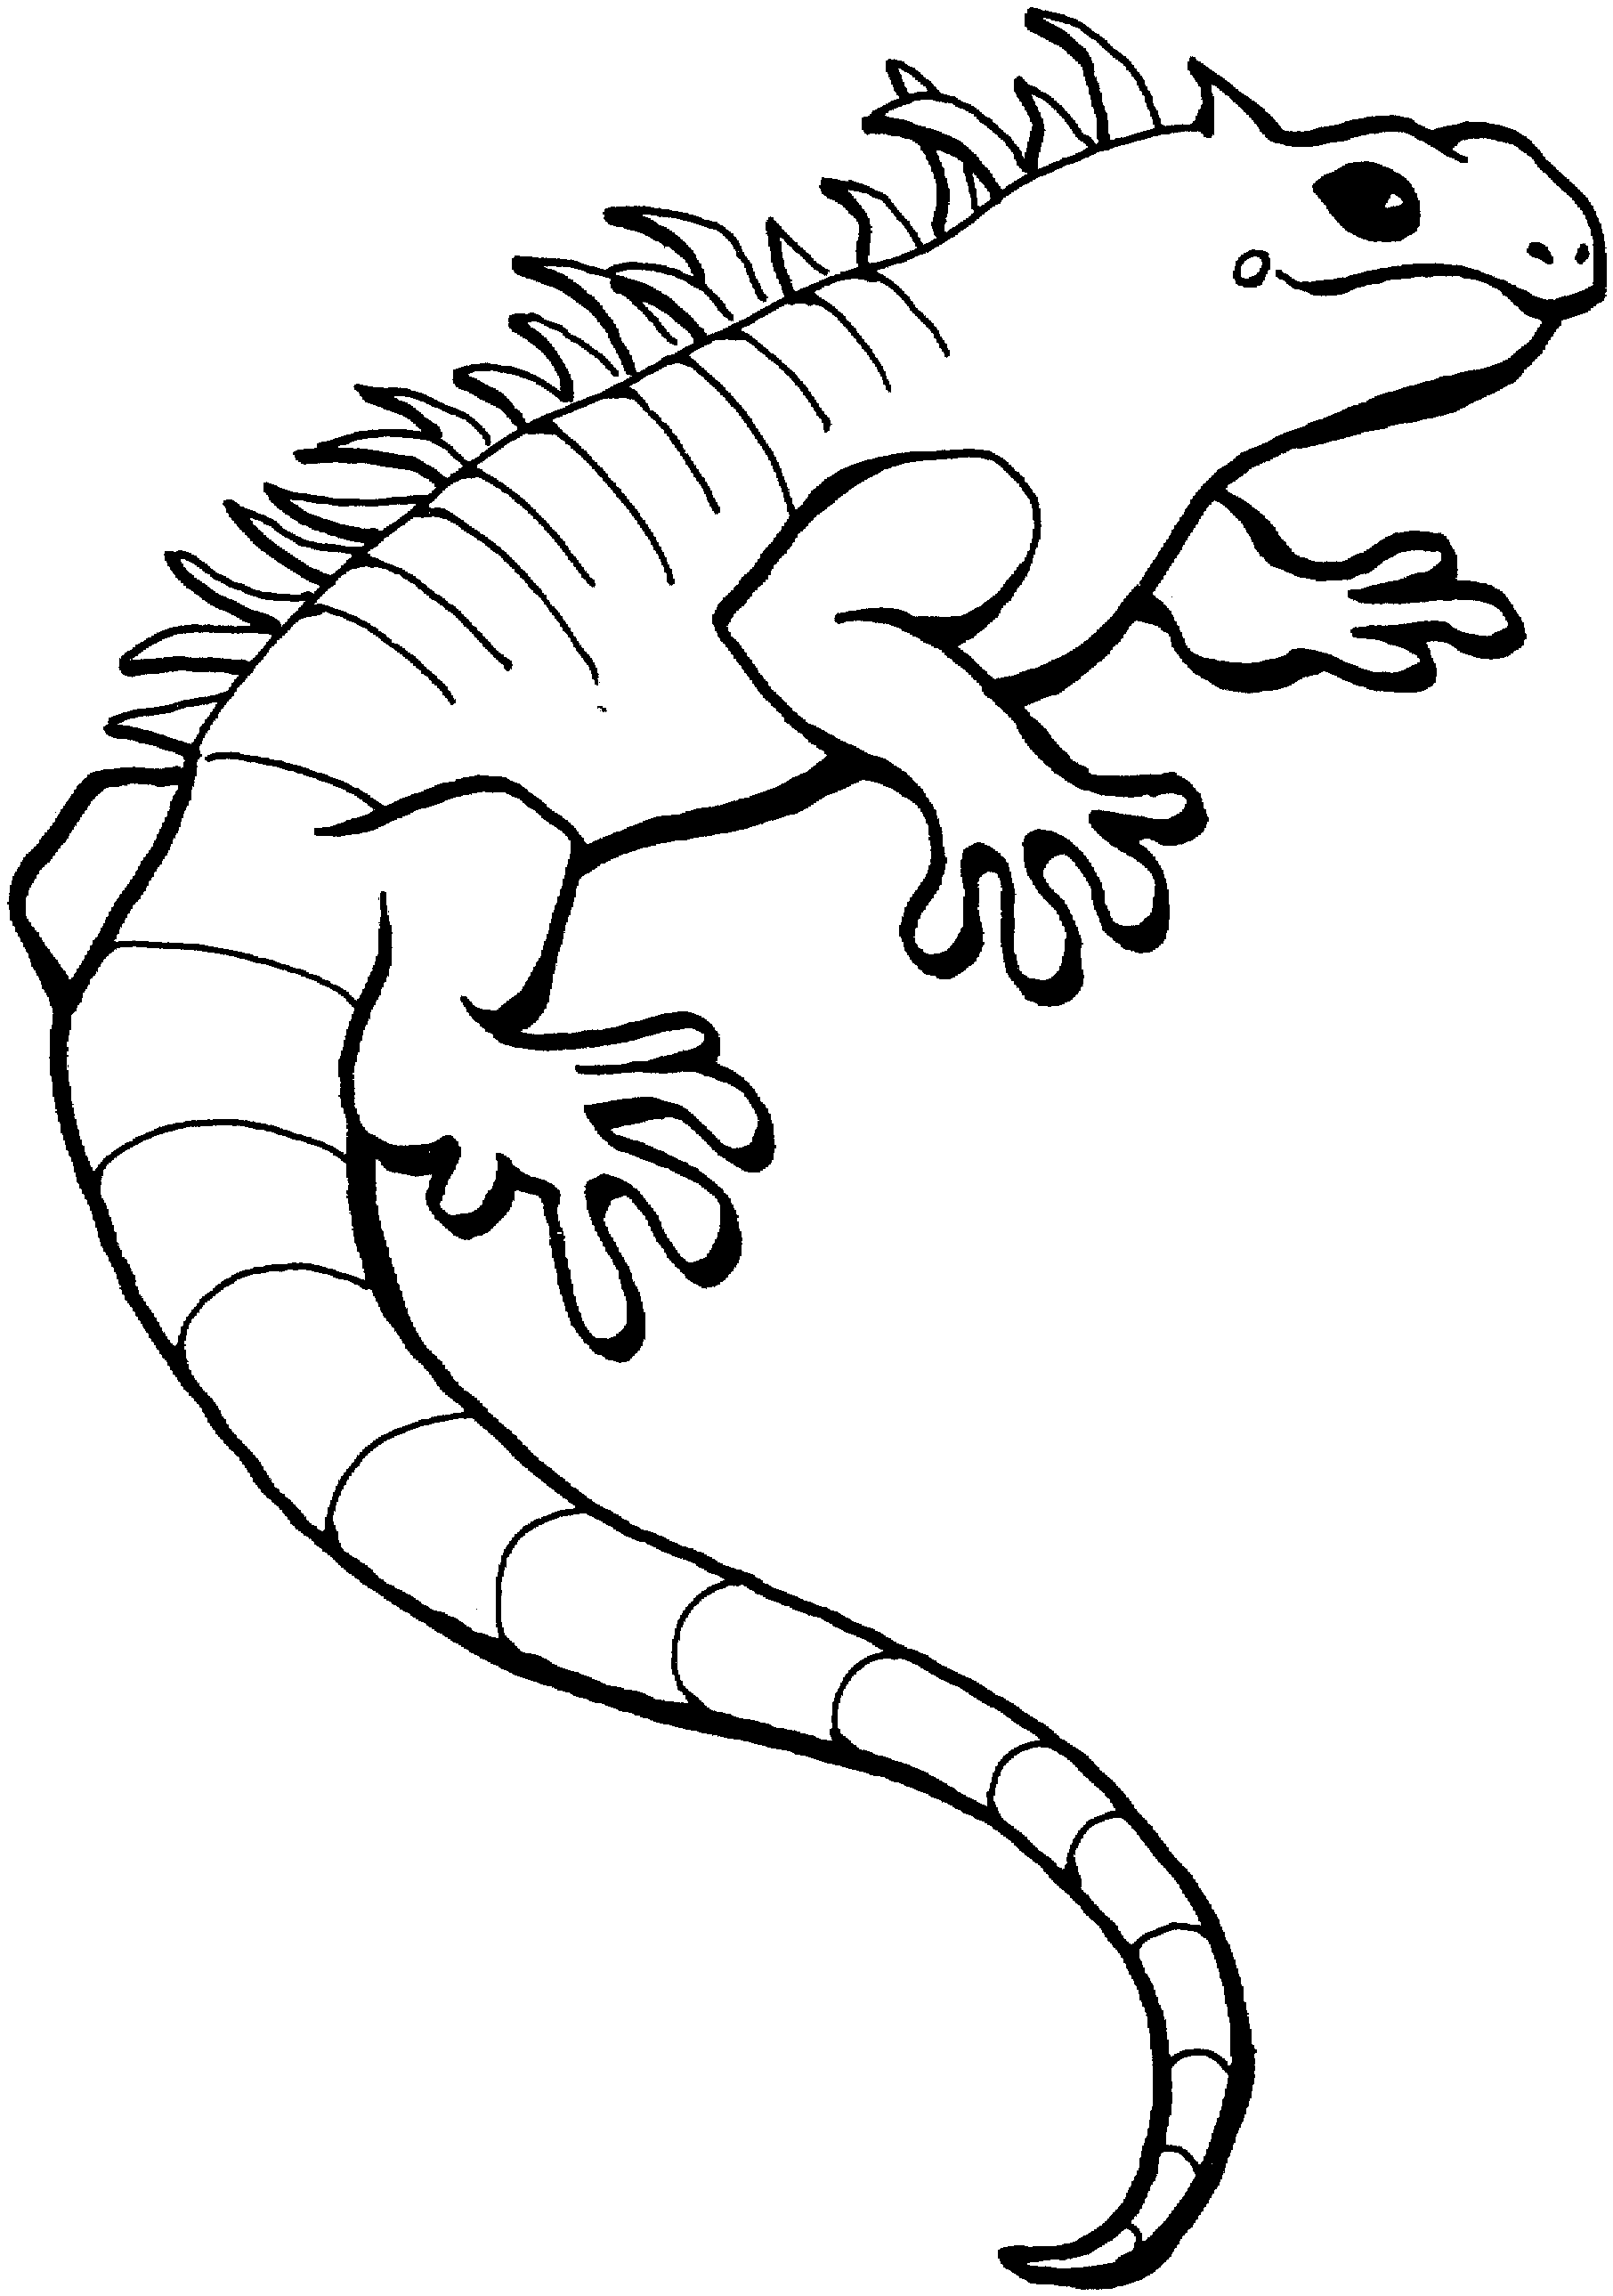 398 Simple Printable Lizard Coloring Pages for Adult